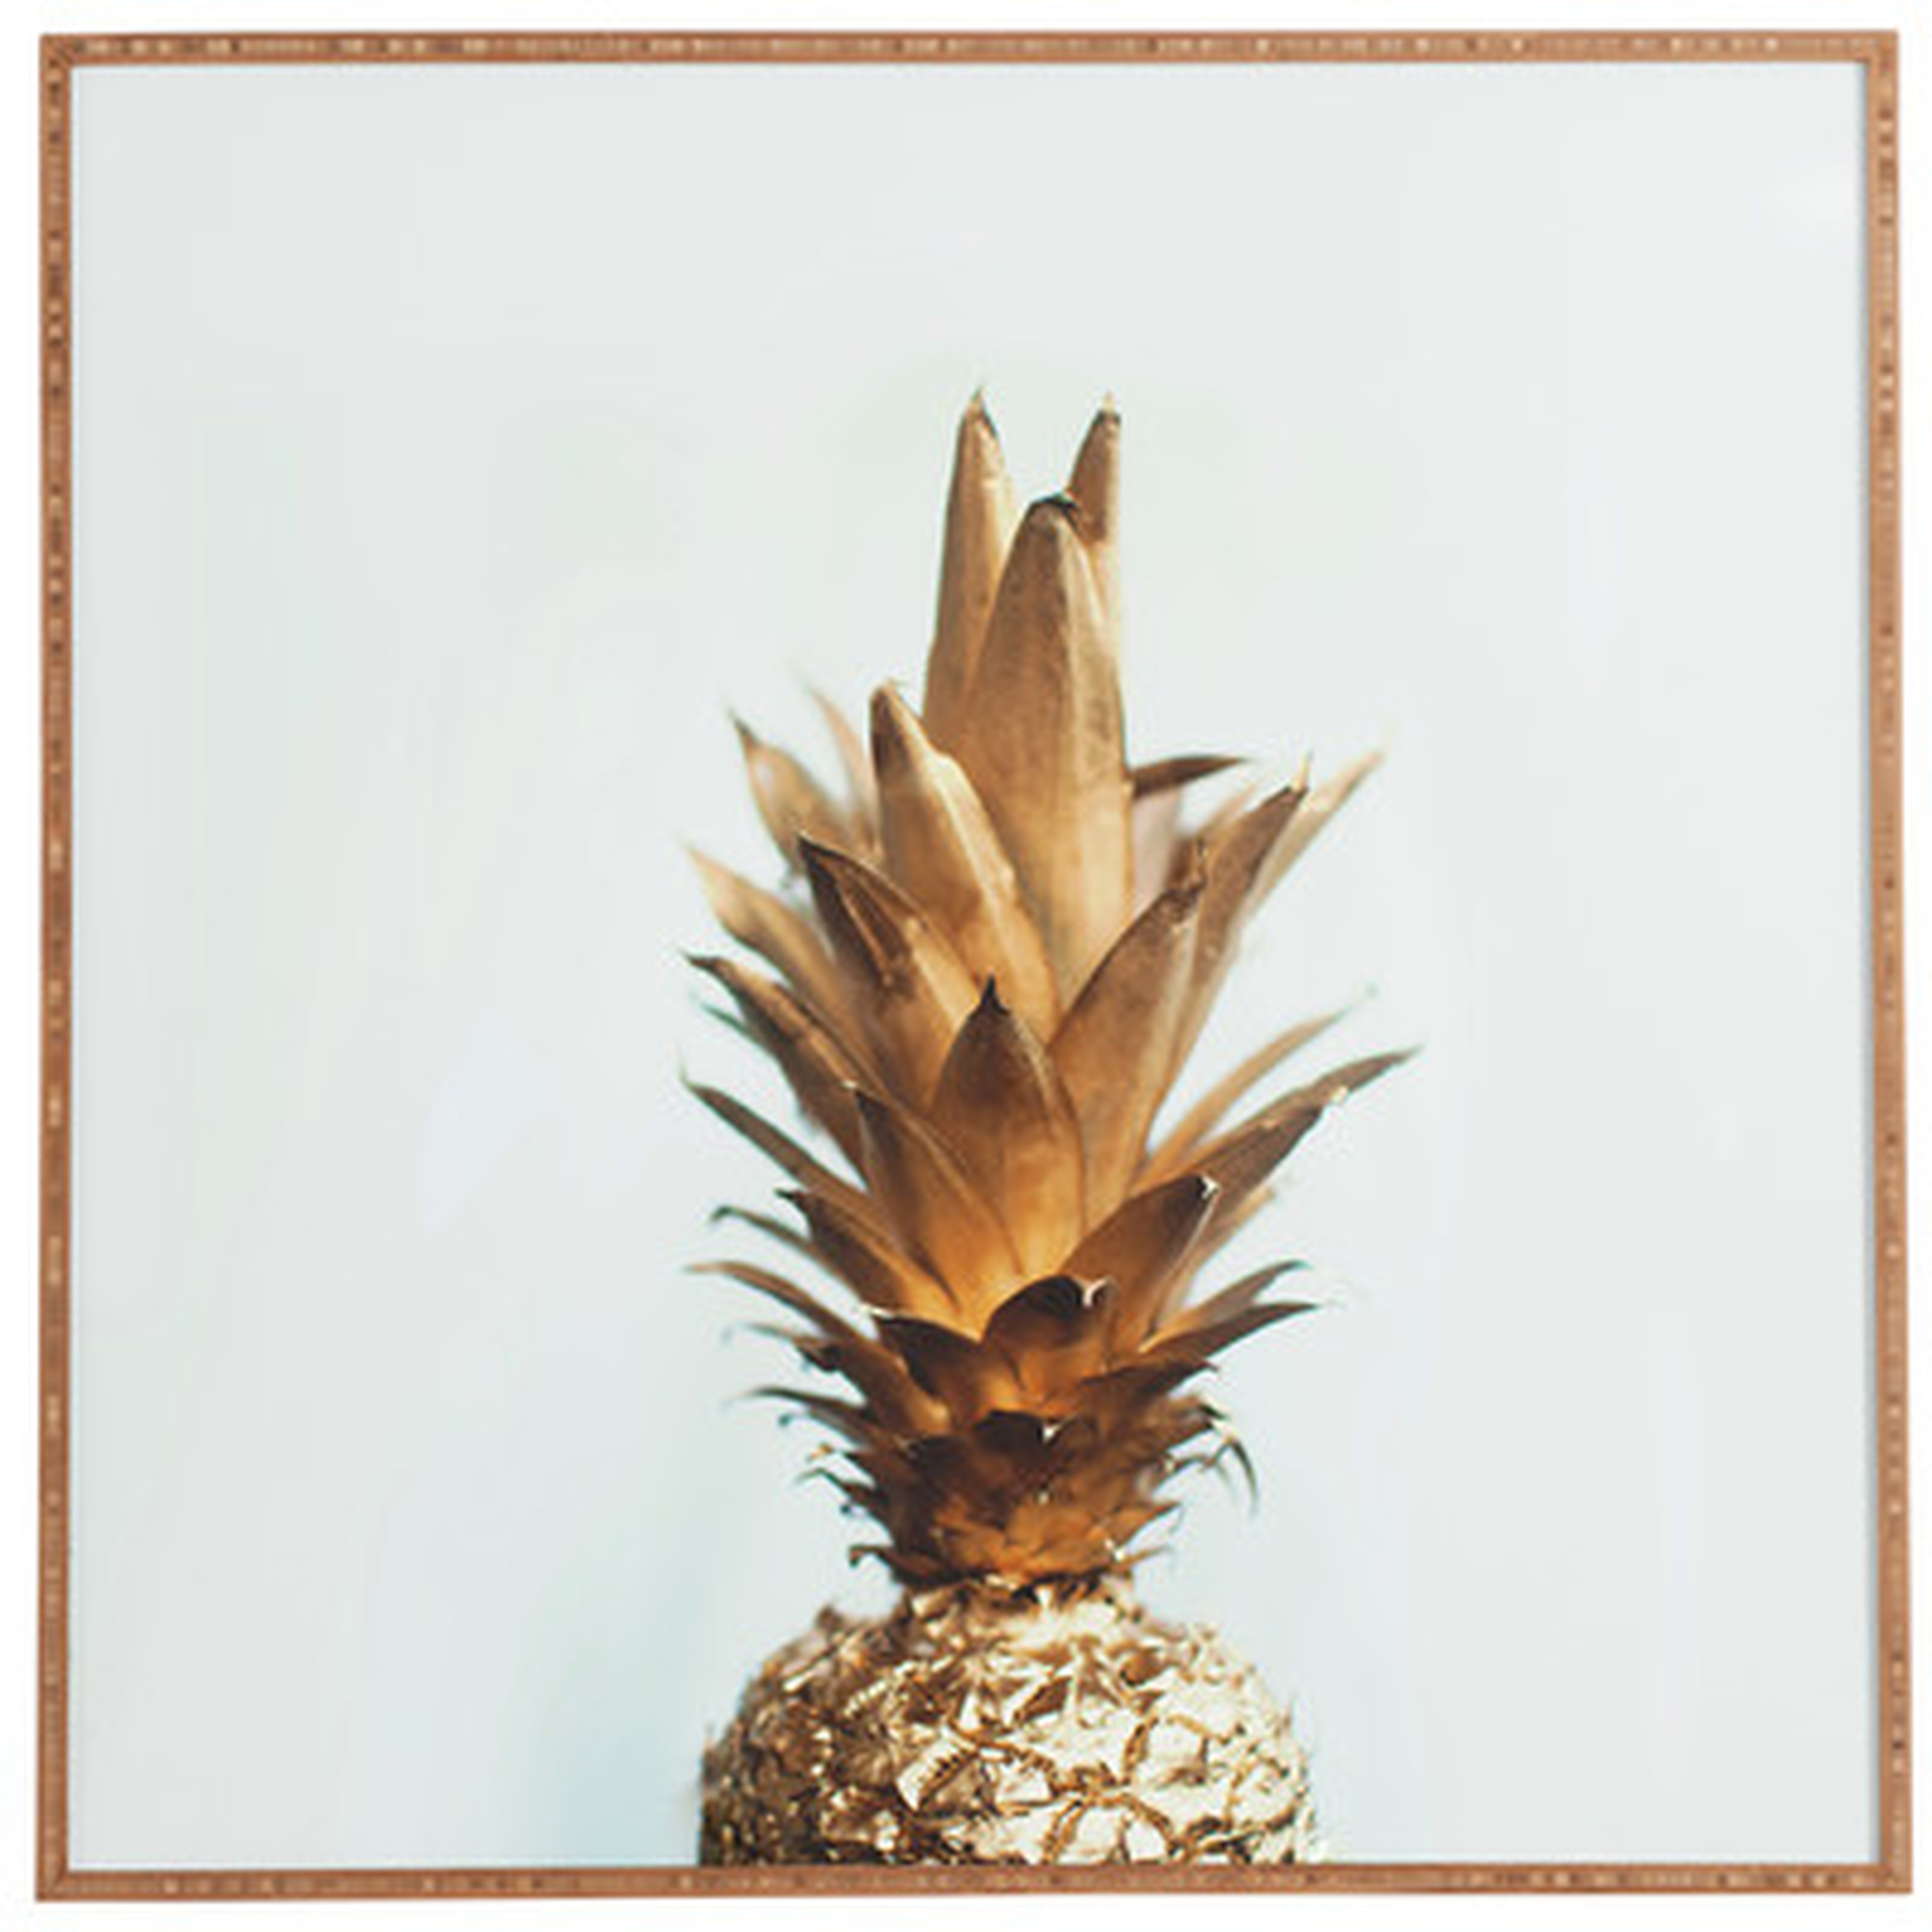 The Gold Pineapple' Framed Graphic Art by Chelsea Victoria - Picture Frame Photograph Print on Wood - AllModern